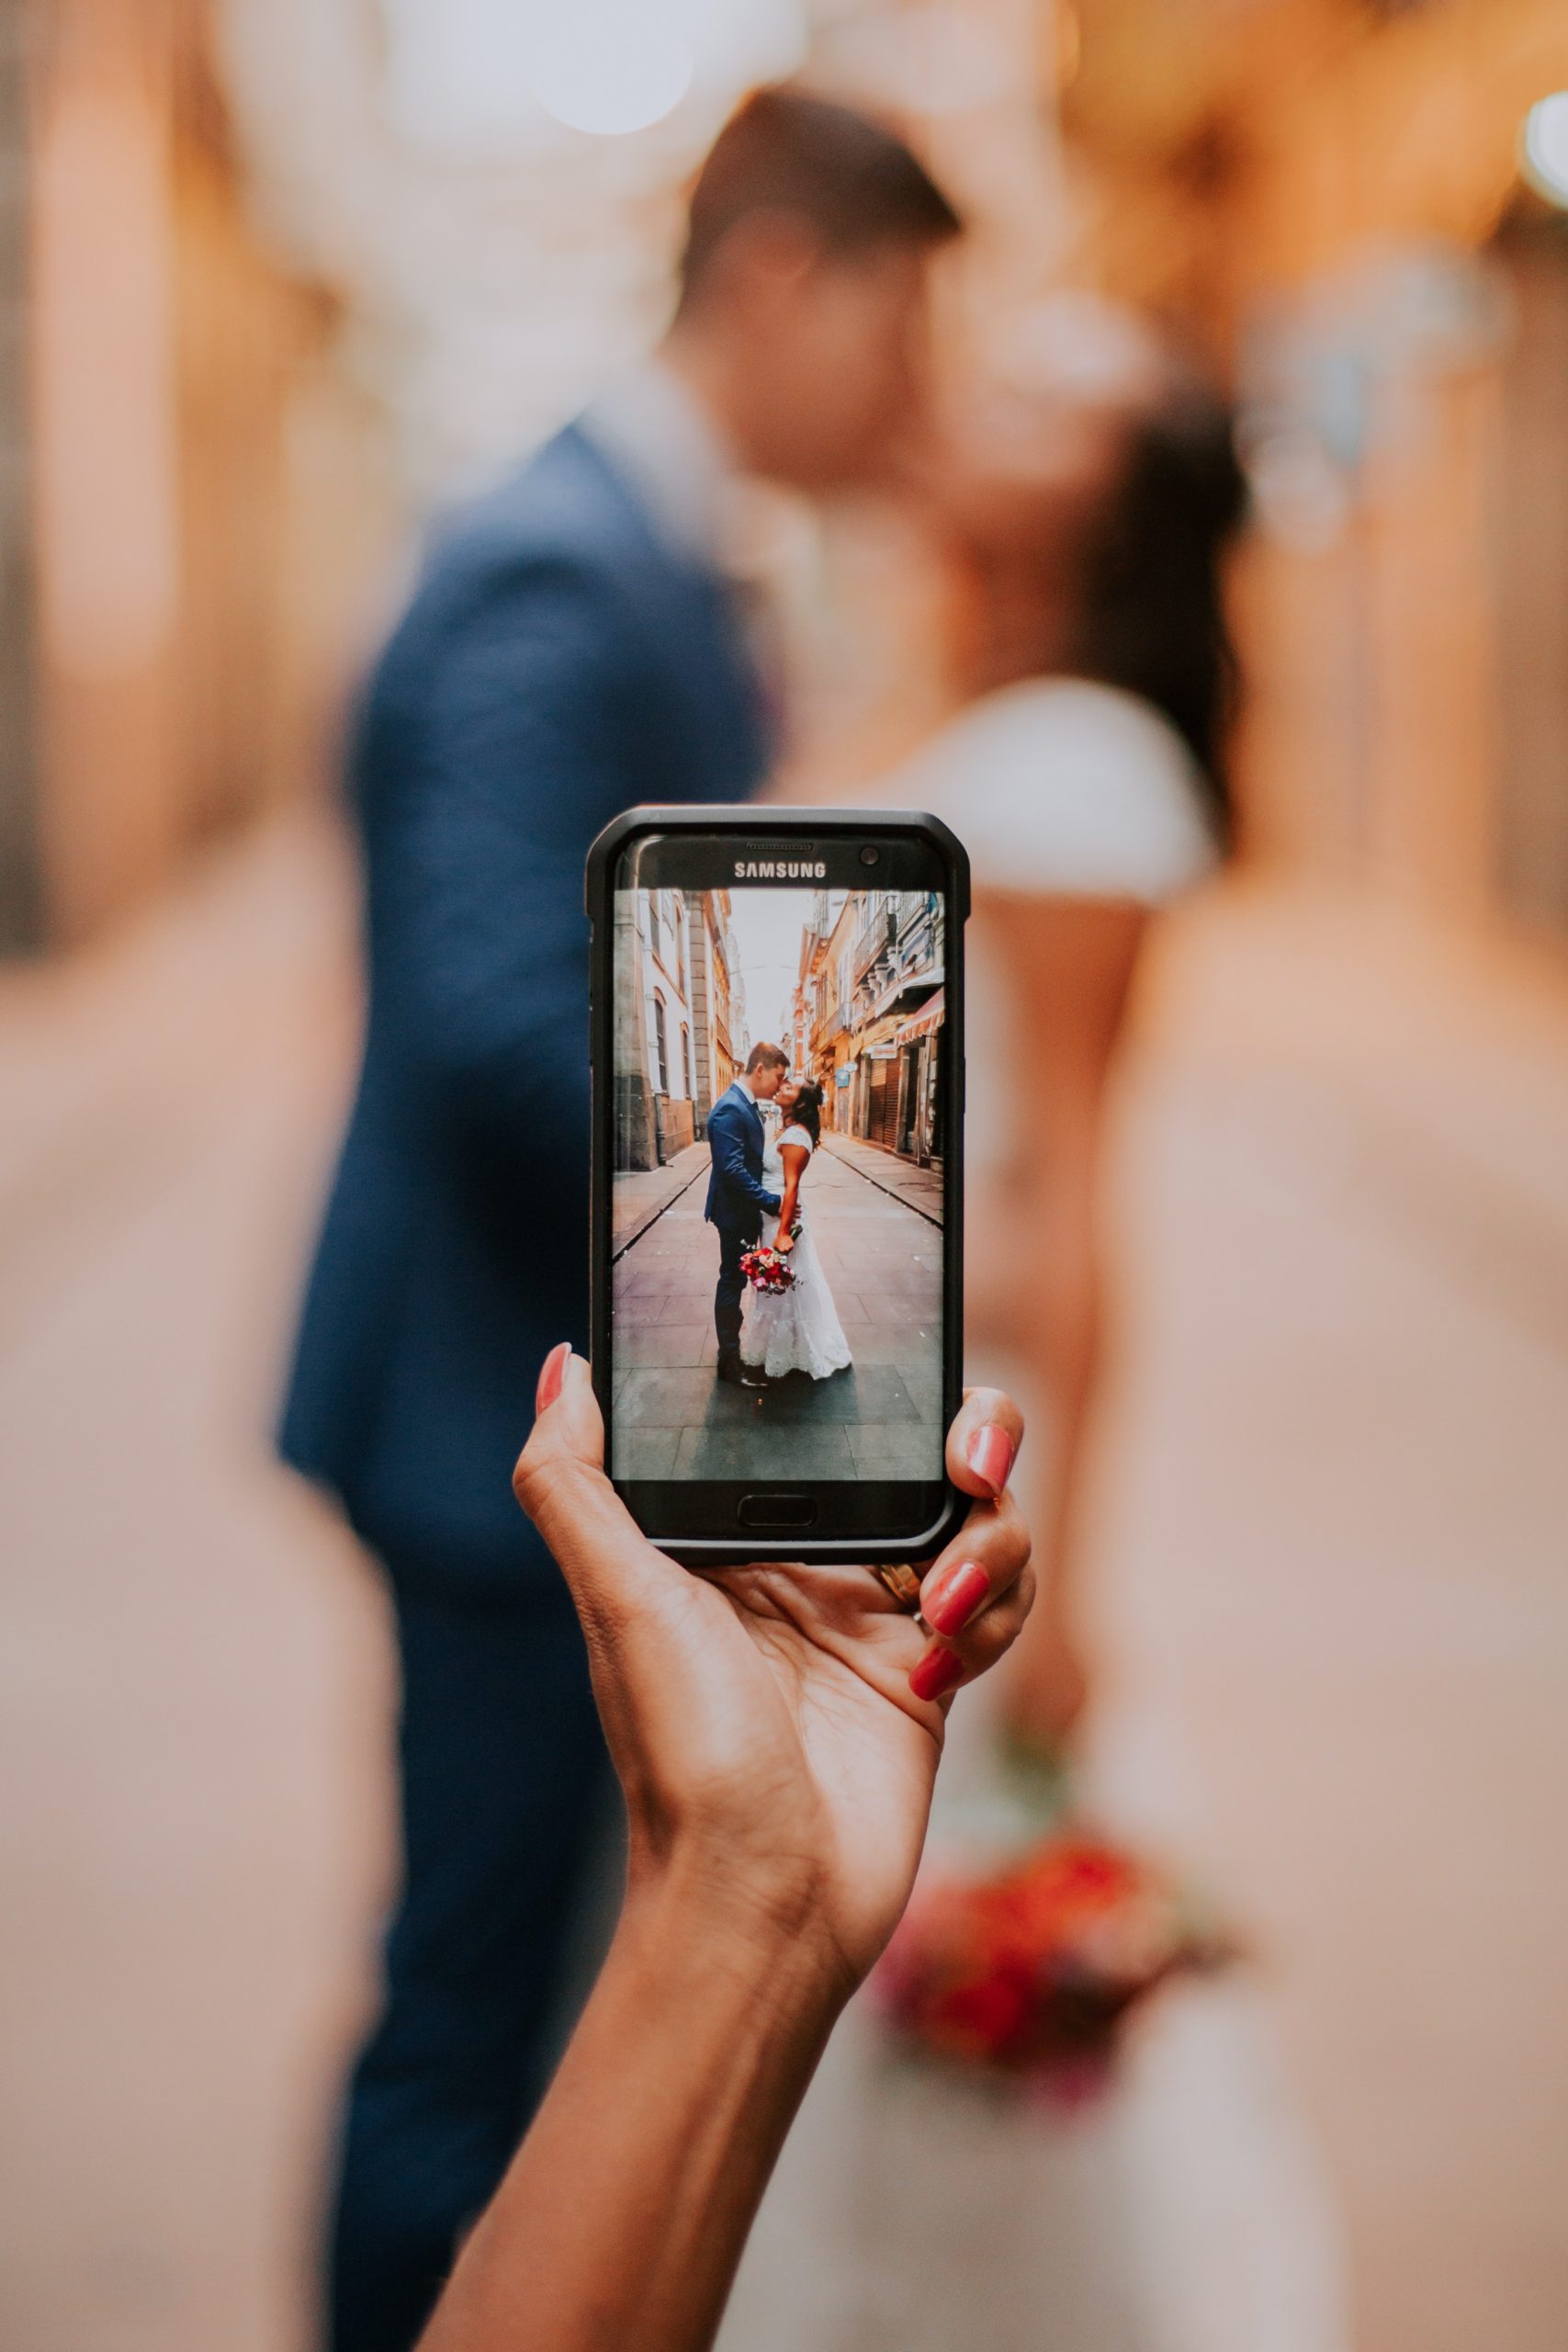 Would you attend a Zoom wedding?